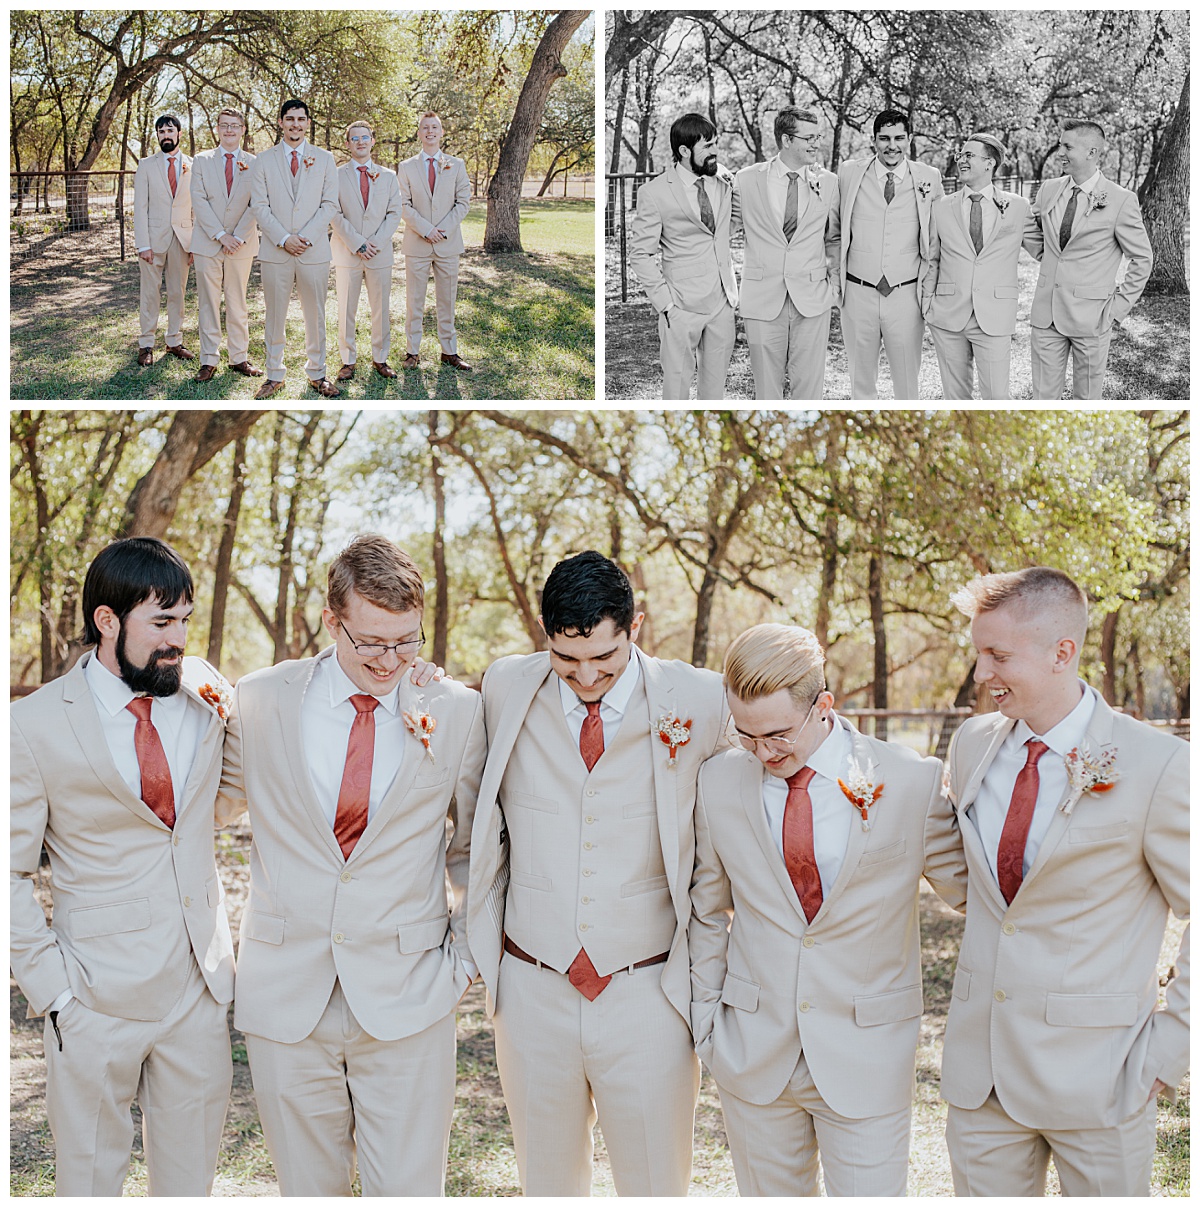 Groomsmen stand together with arms around each other by Ellie Chavez Photography 